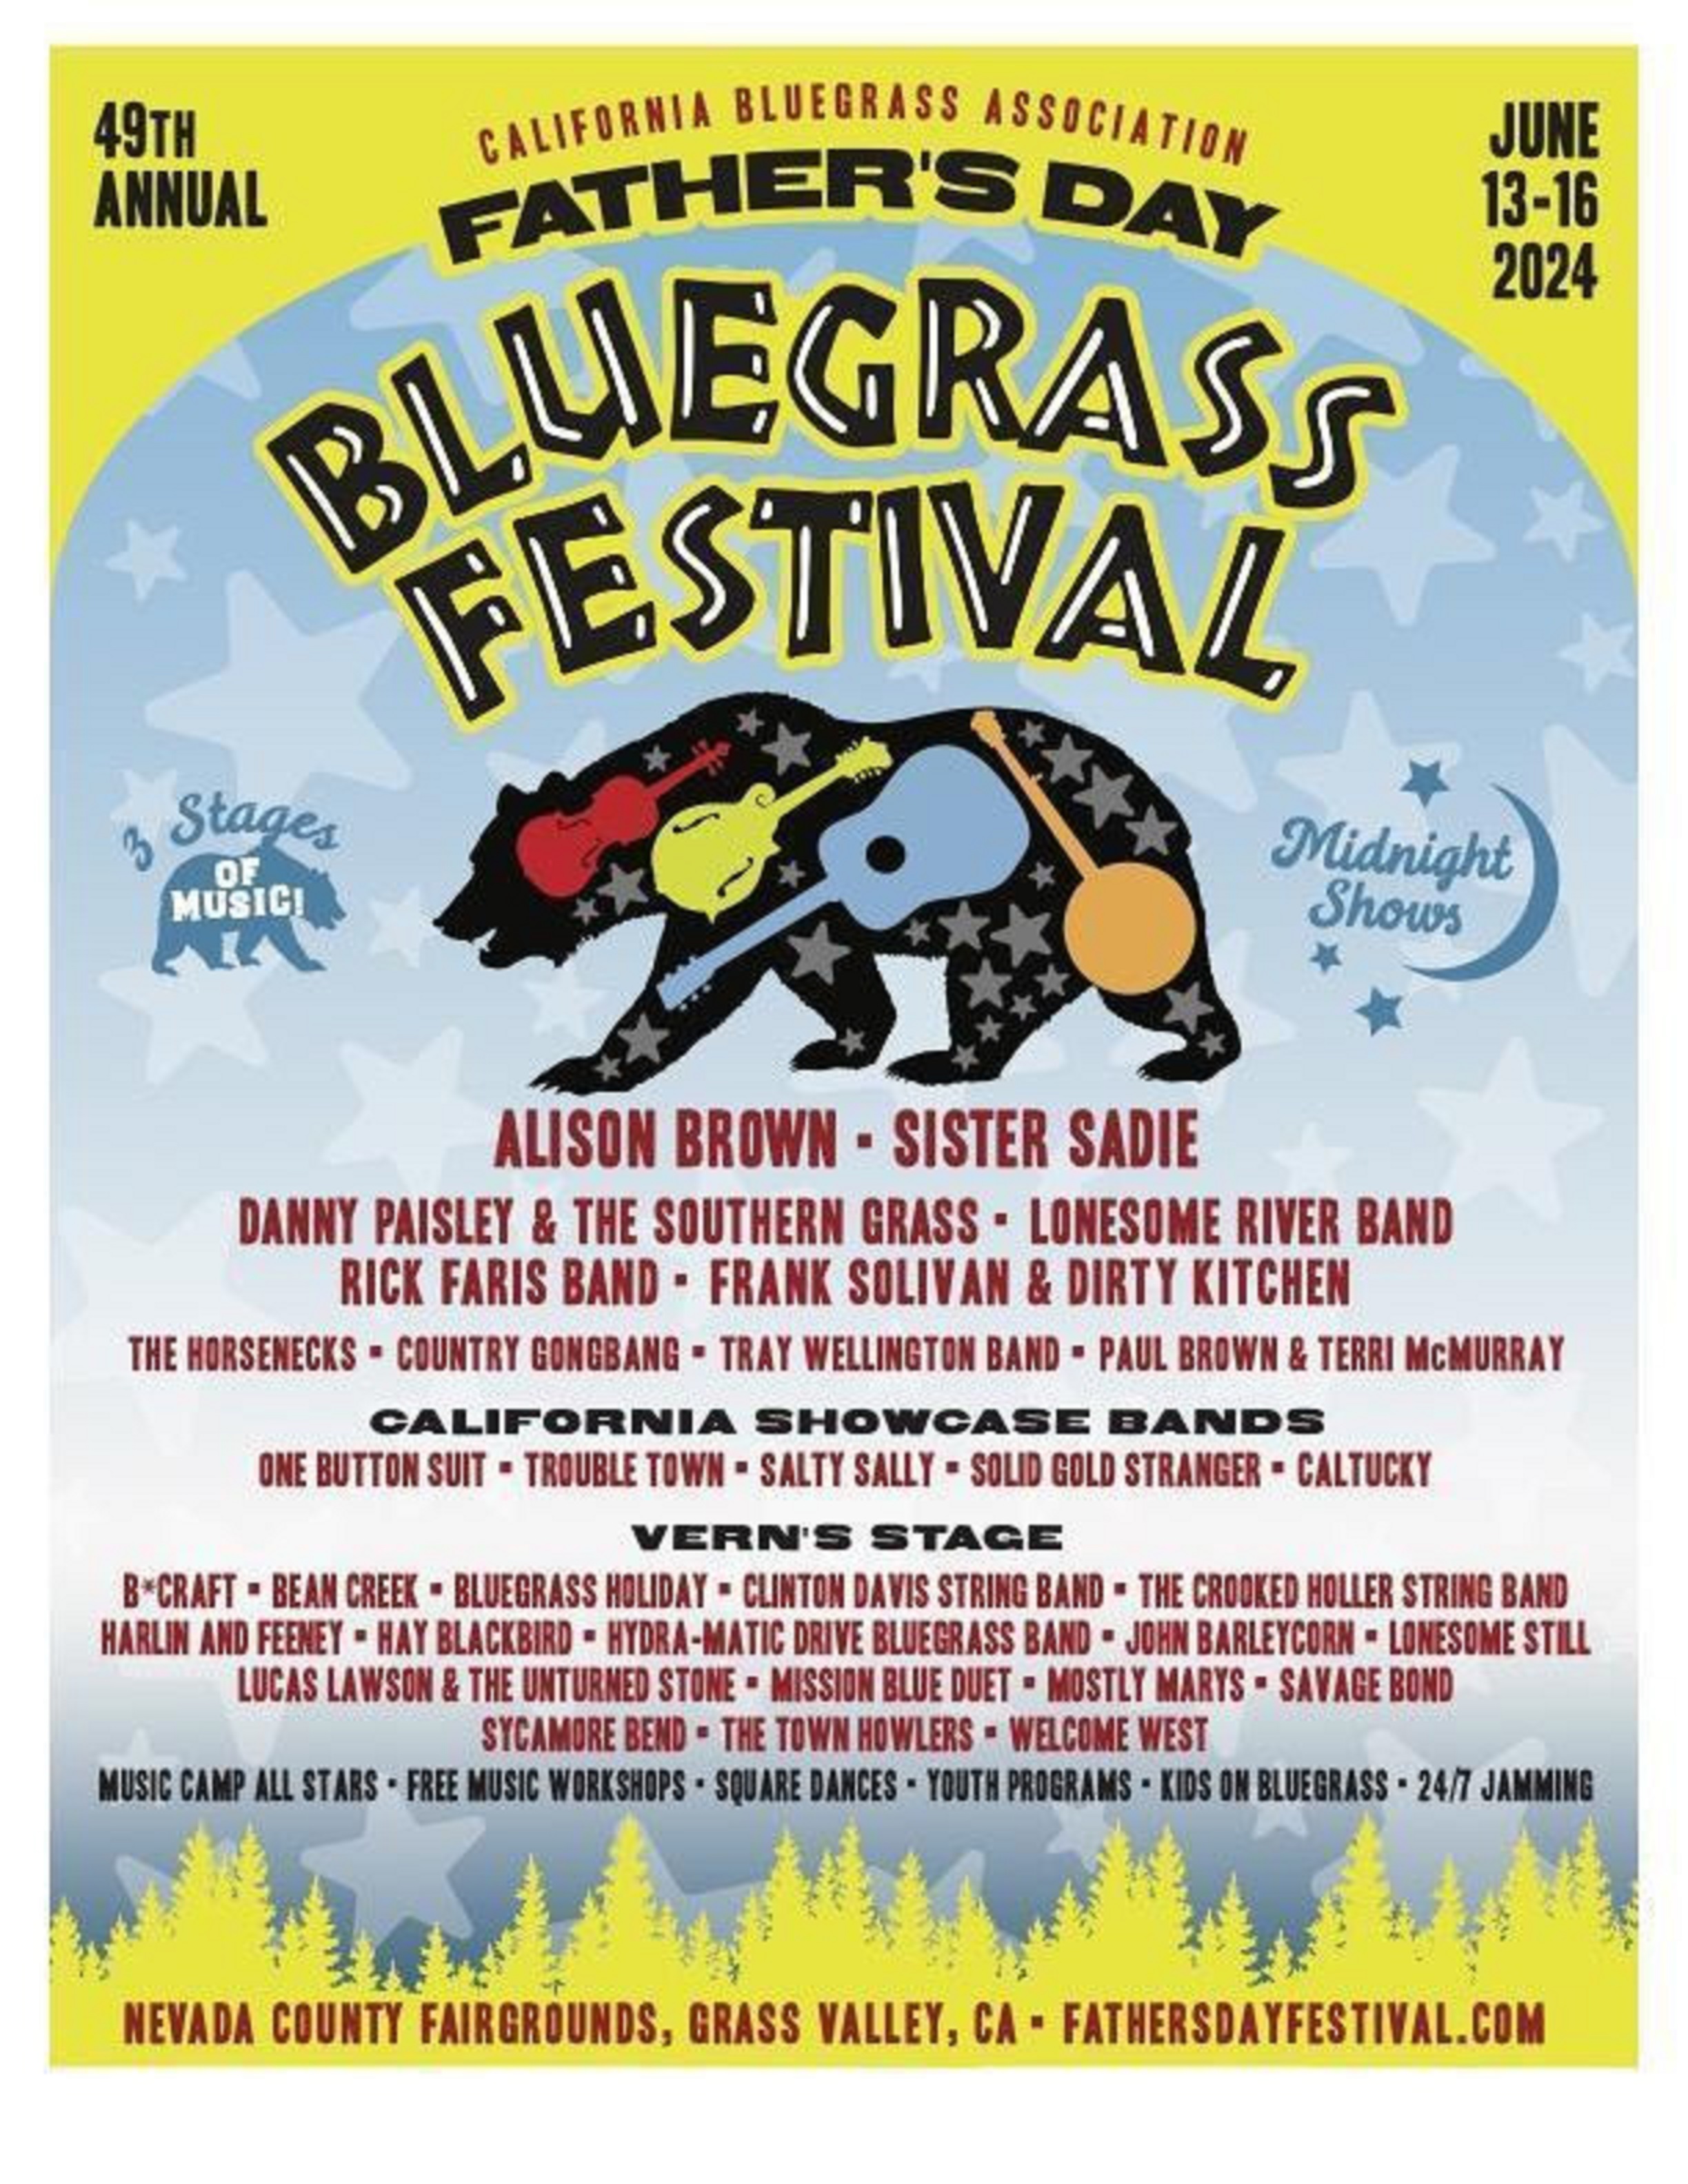 Father's Day Bluegrass Festival Announces Midnight Special Concerts and Stage Schedules